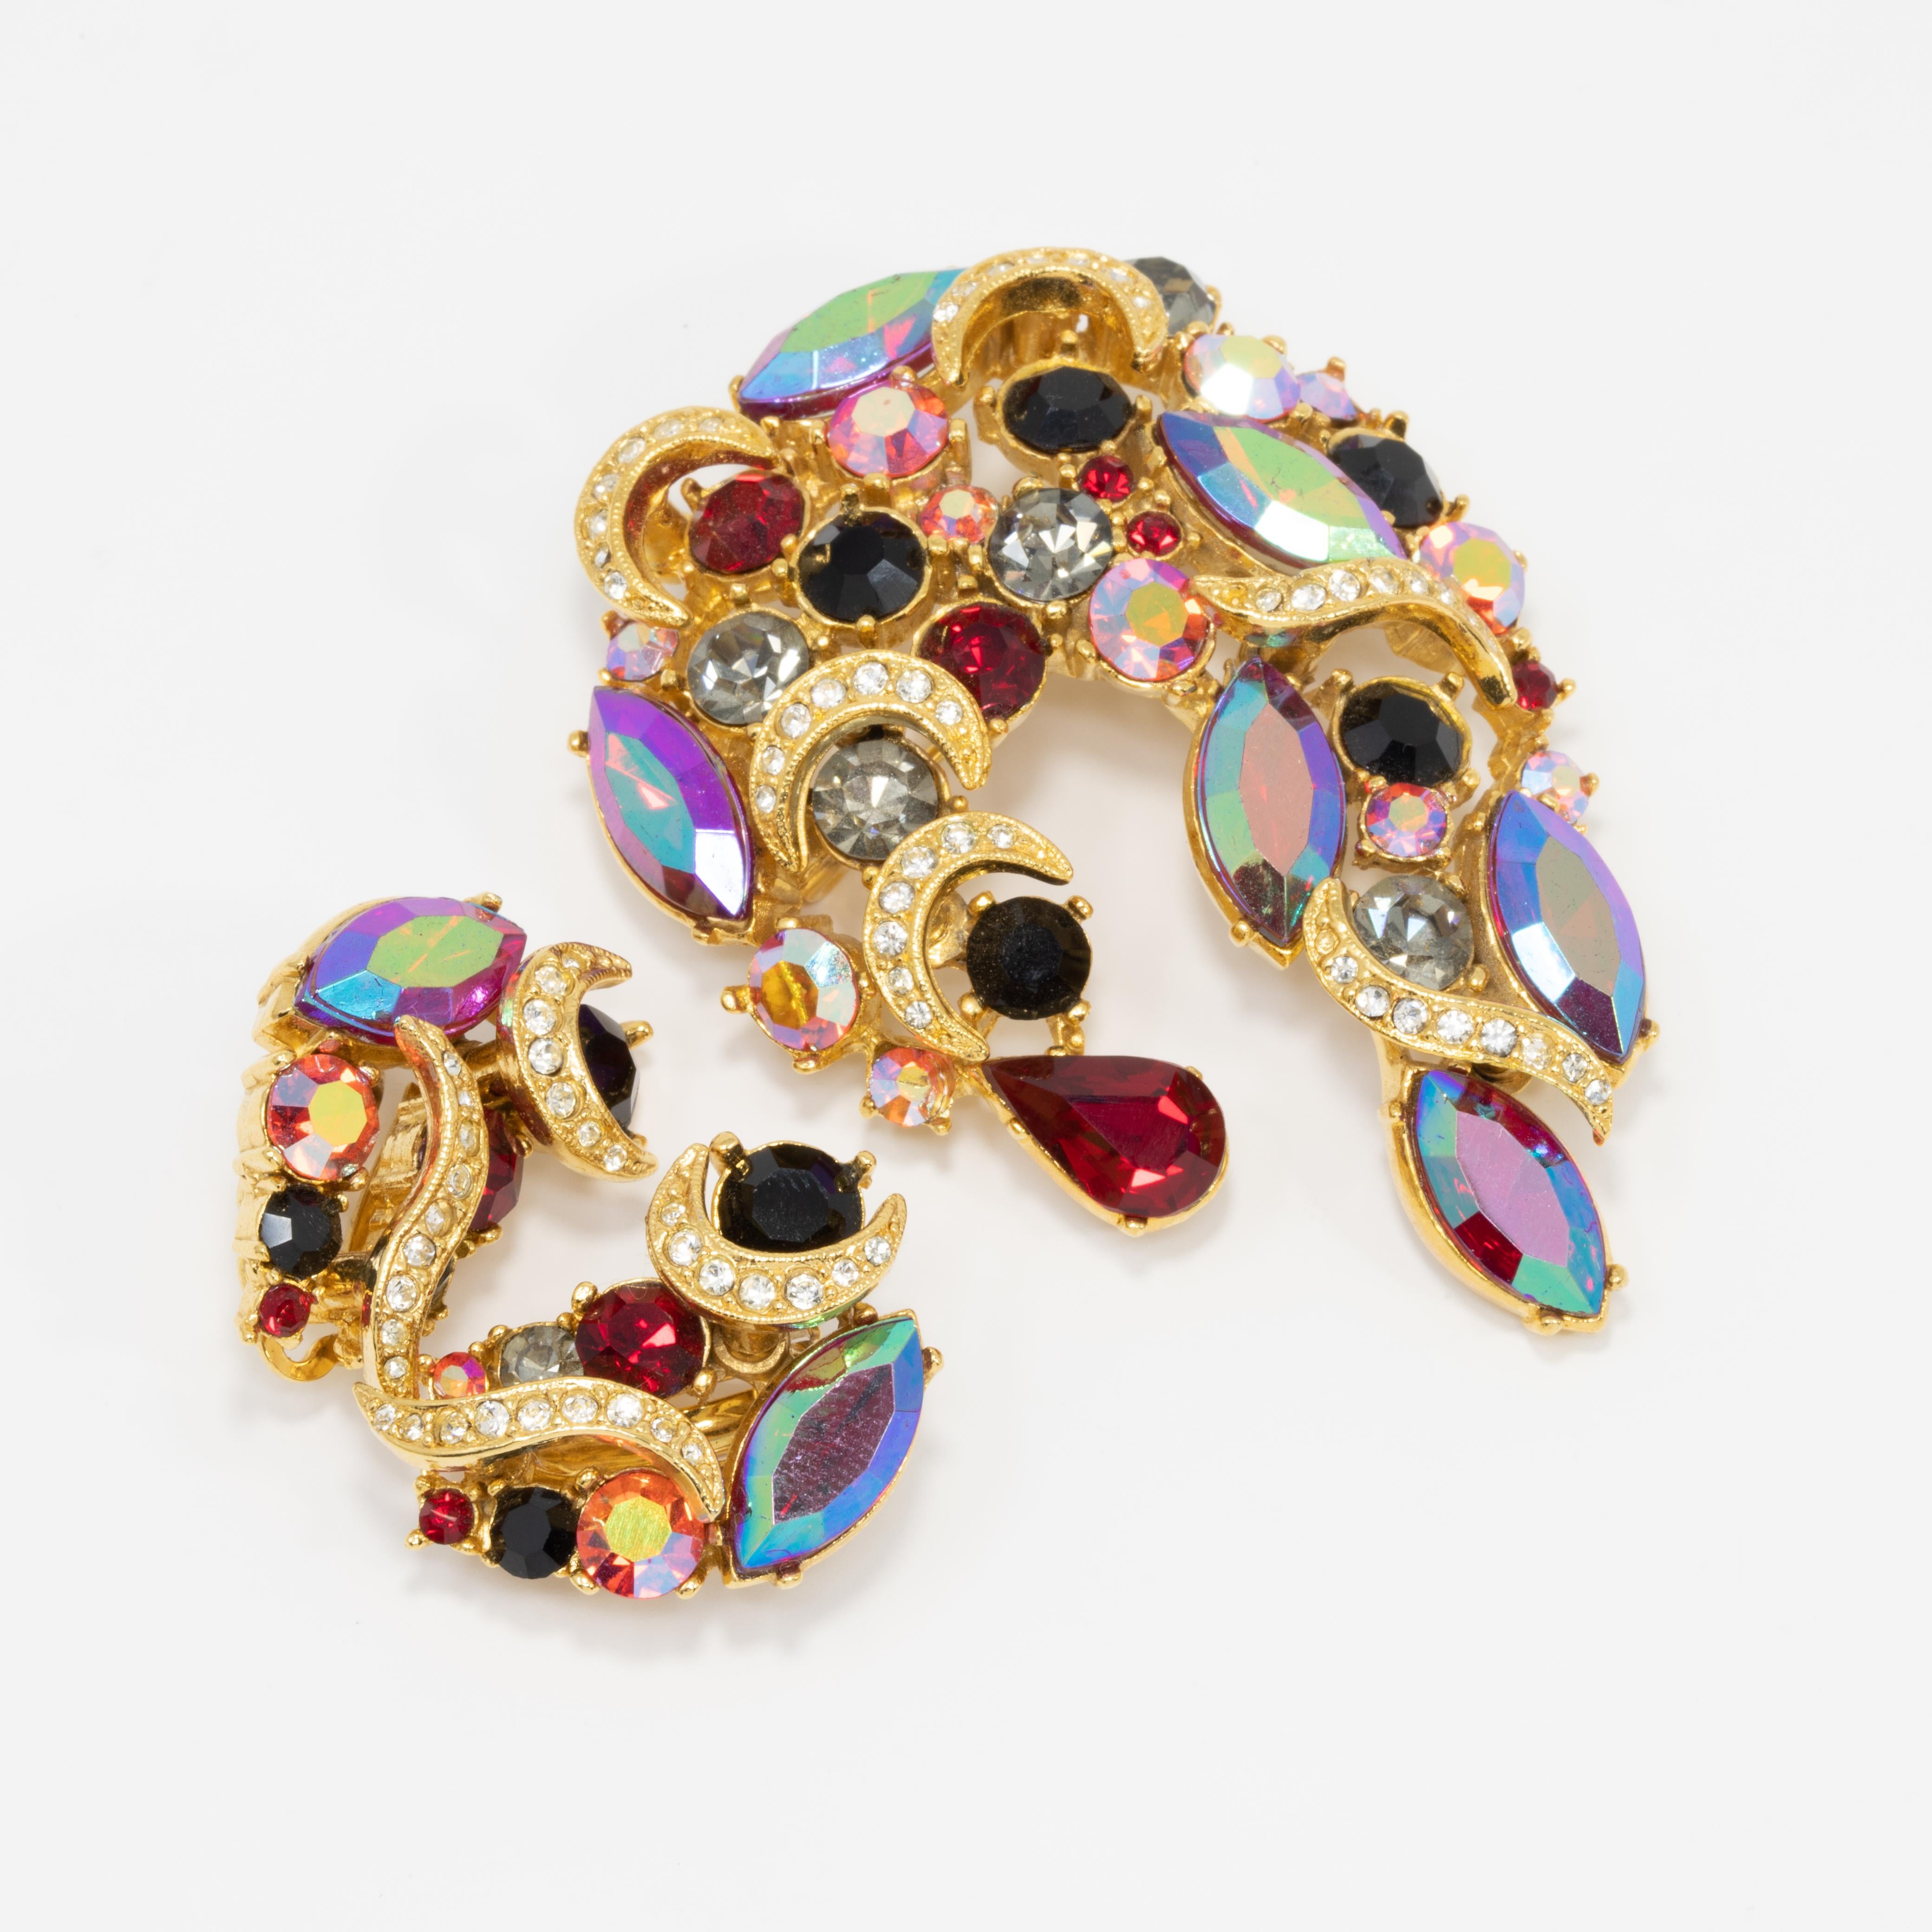 A matching pin and pair of clip on earrings by Sphinx, featuring siam-red aurora borealis crystals prong-set in a decorative gold-plated setting.

Pin dimensions: 2.7 in x 1.9 in
Earring dimensions: 1 in x .7 in

Hallmarks: Sphinx (pin and both